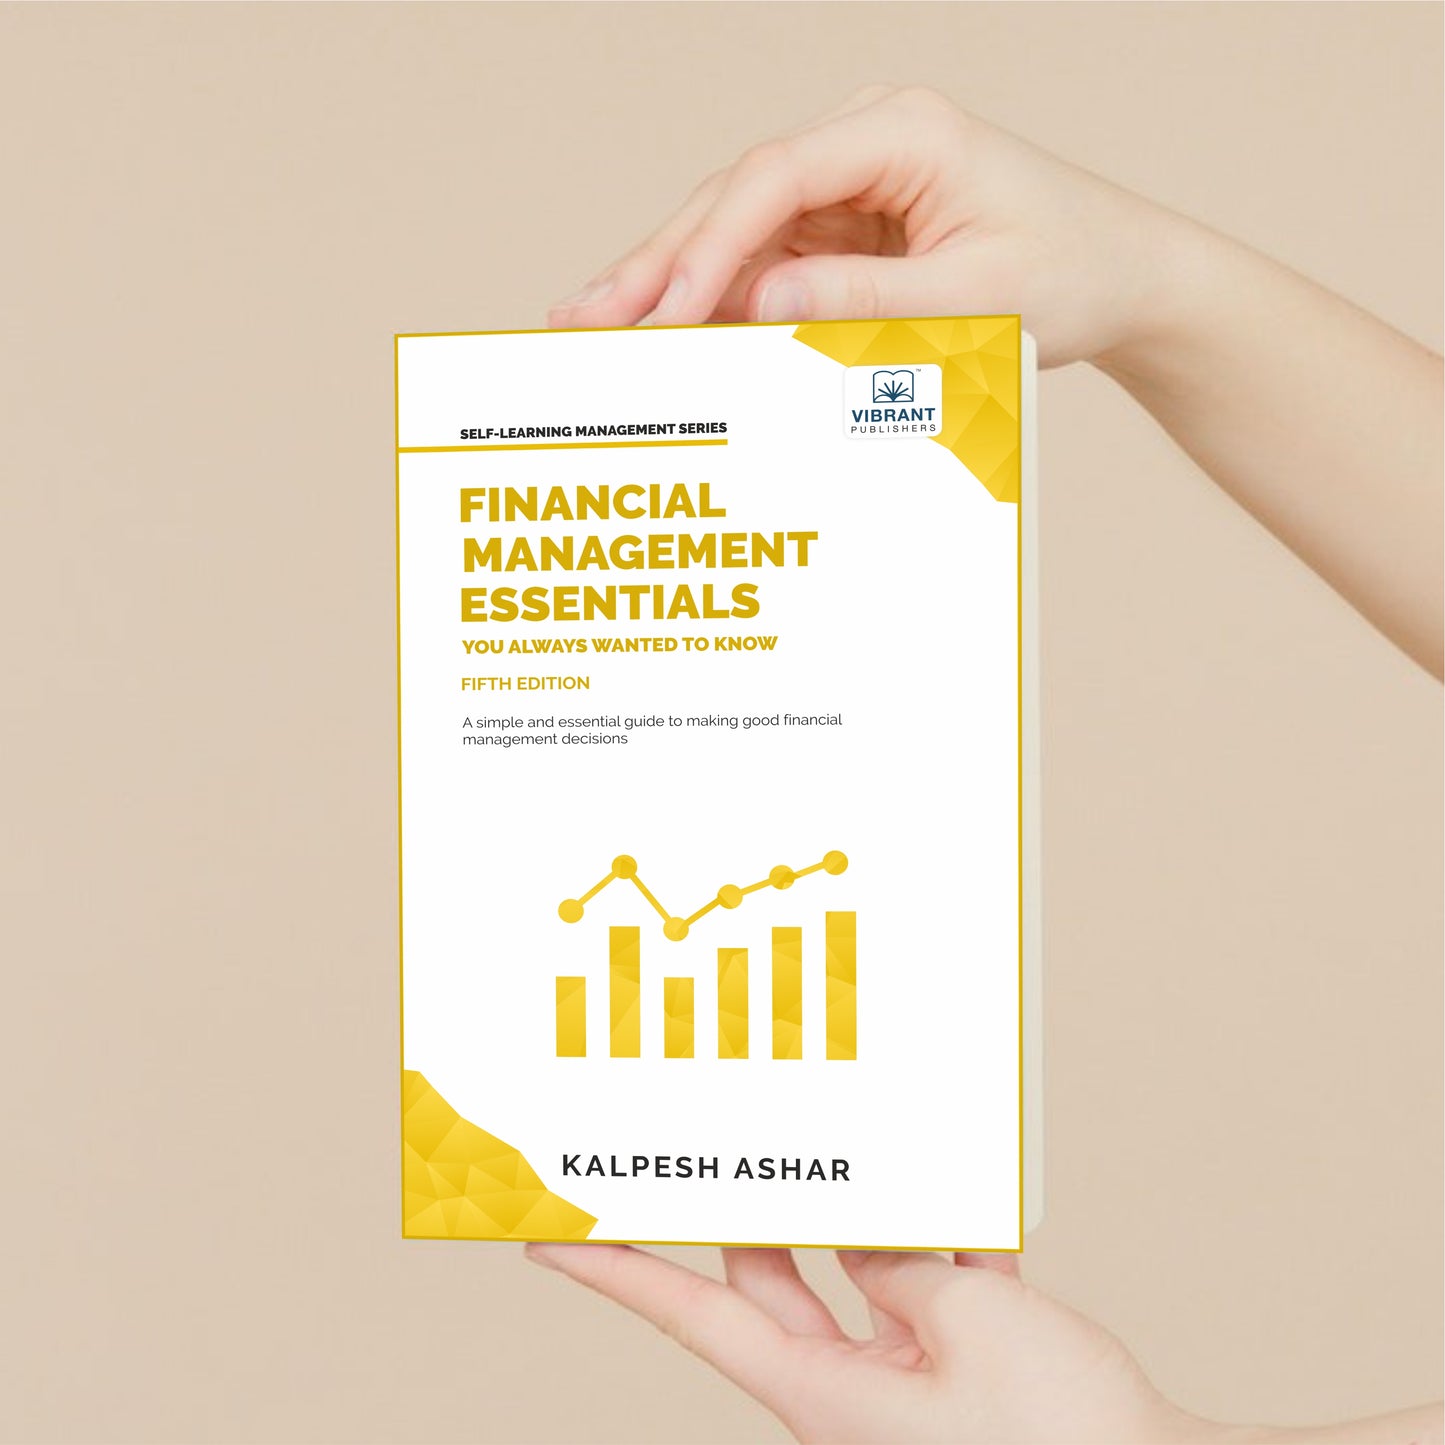 Financial Management Essentials You Always Wanted To Know: 5th Edition